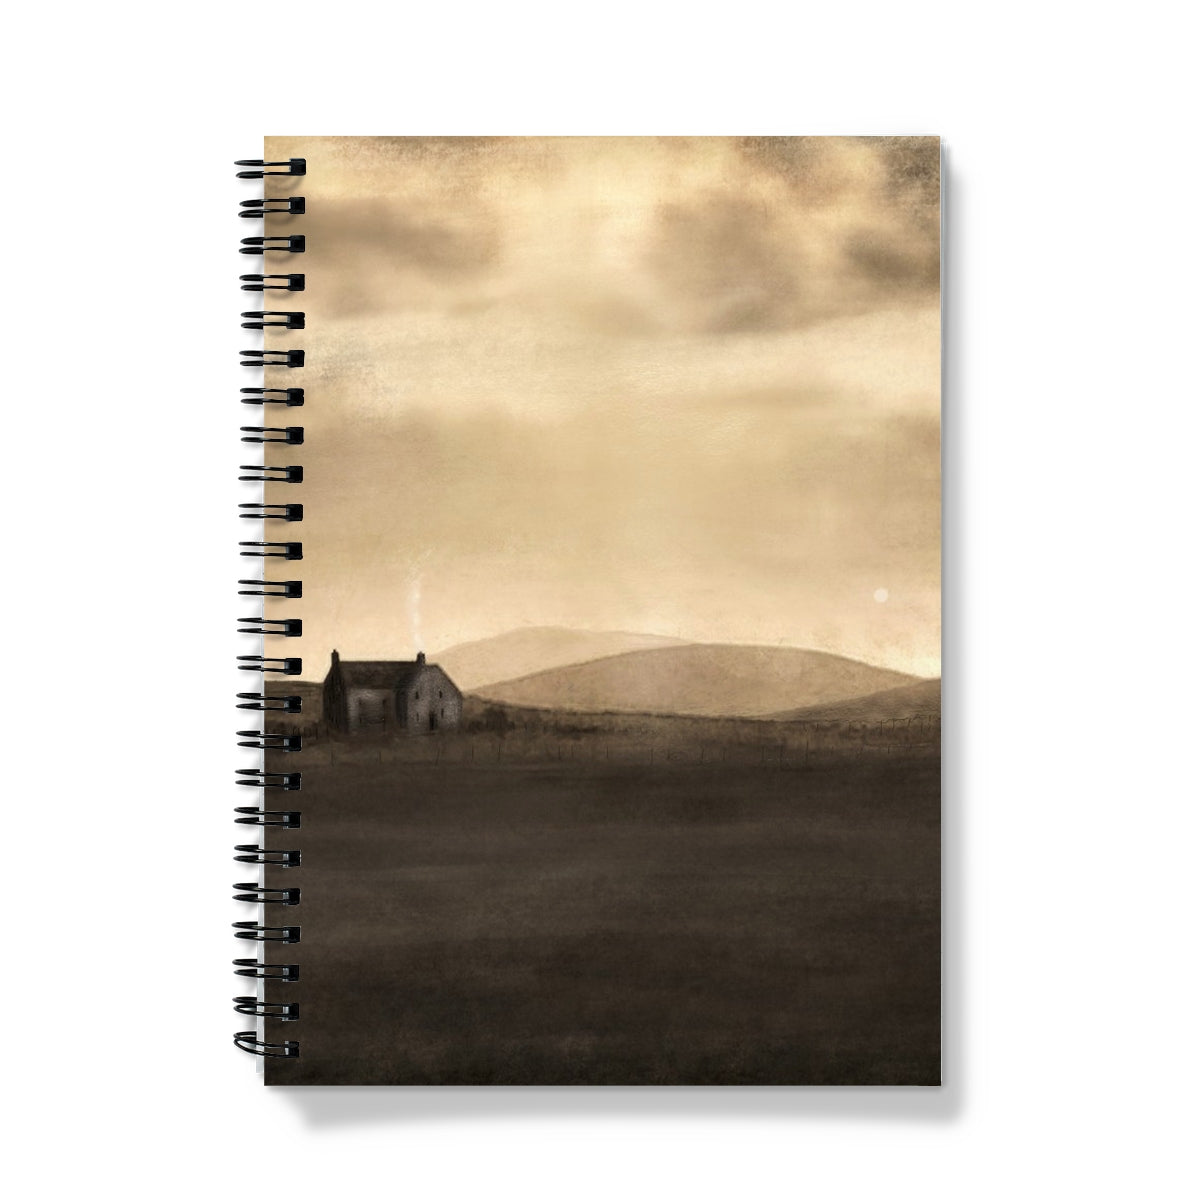 A Moonlit Croft Art Gifts Notebook-Journals & Notebooks-Hebridean Islands Art Gallery-A5-Lined-Paintings, Prints, Homeware, Art Gifts From Scotland By Scottish Artist Kevin Hunter